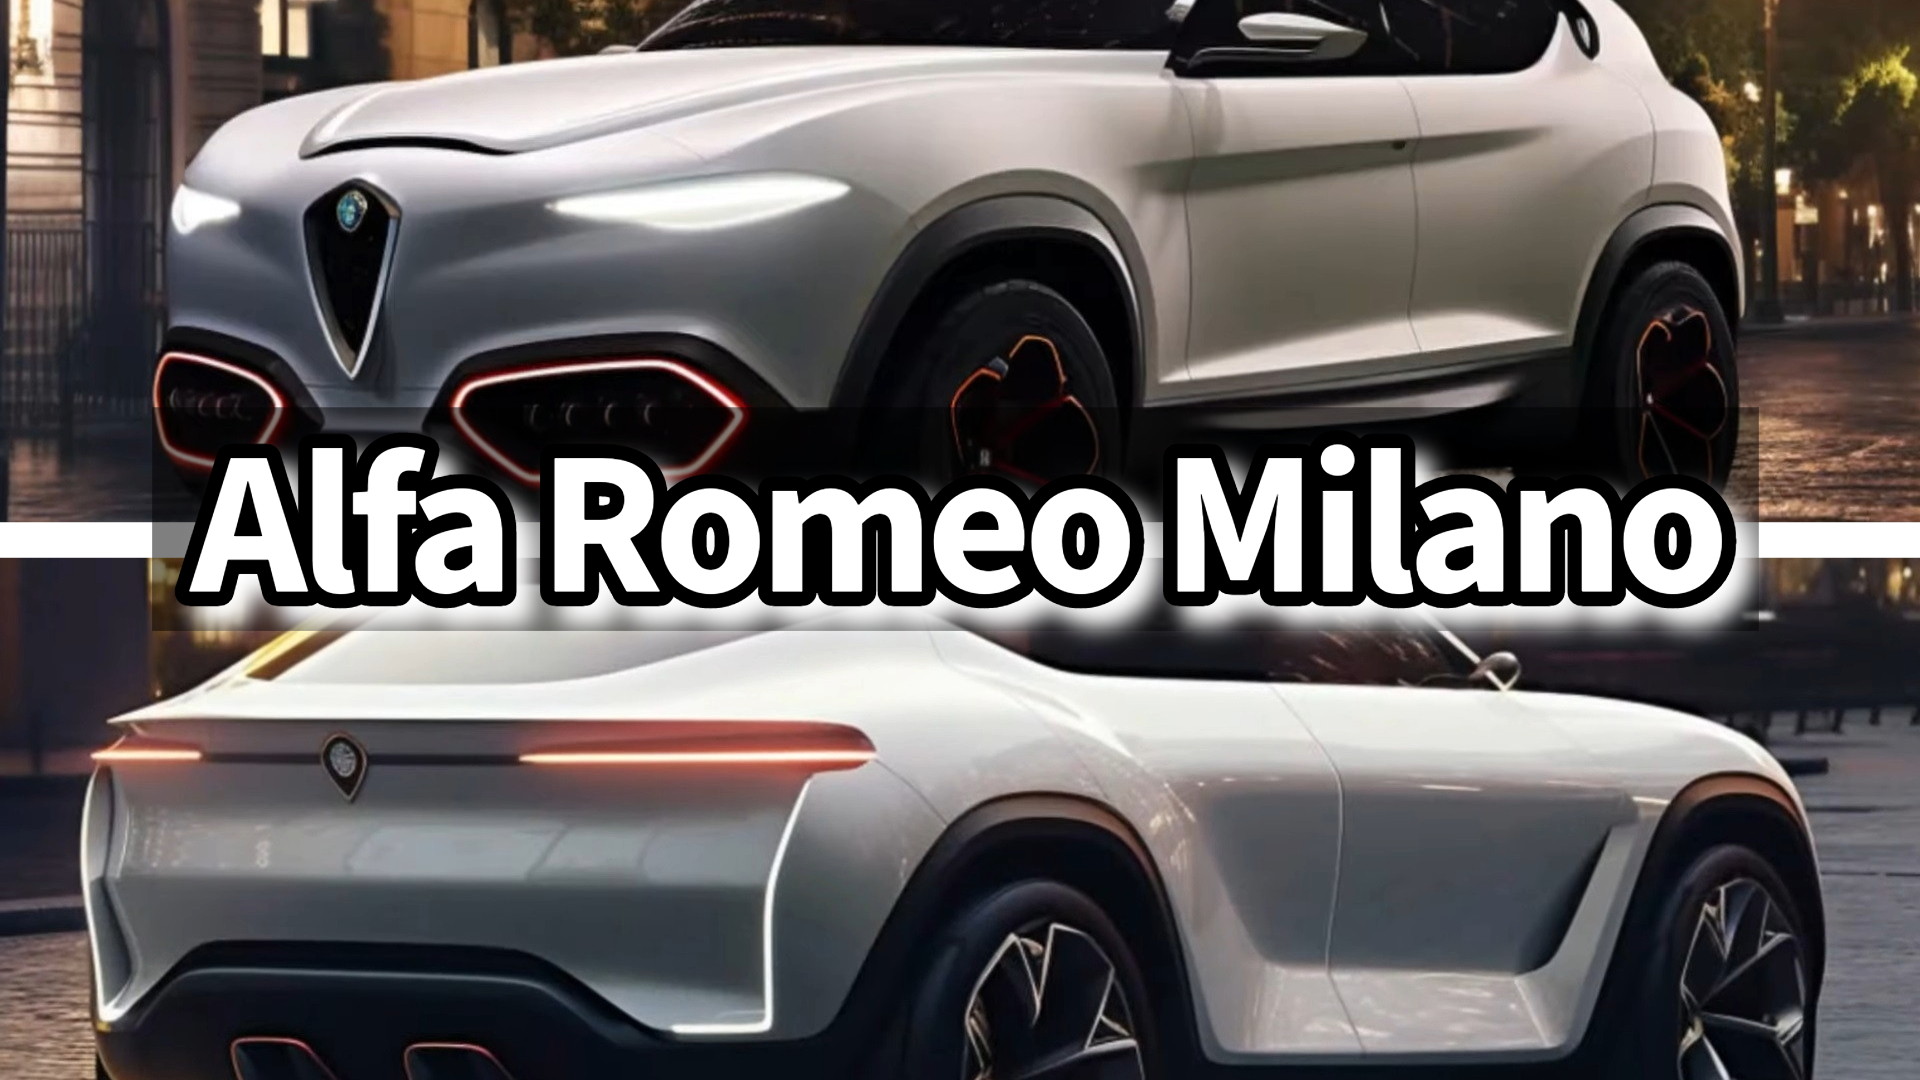 https://s1.cdn.autoevolution.com/images/news/alfa-romeo-milano-everything-we-know-about-the-new-small-suv-that-s-coming-in-2024-227222_1.jpg